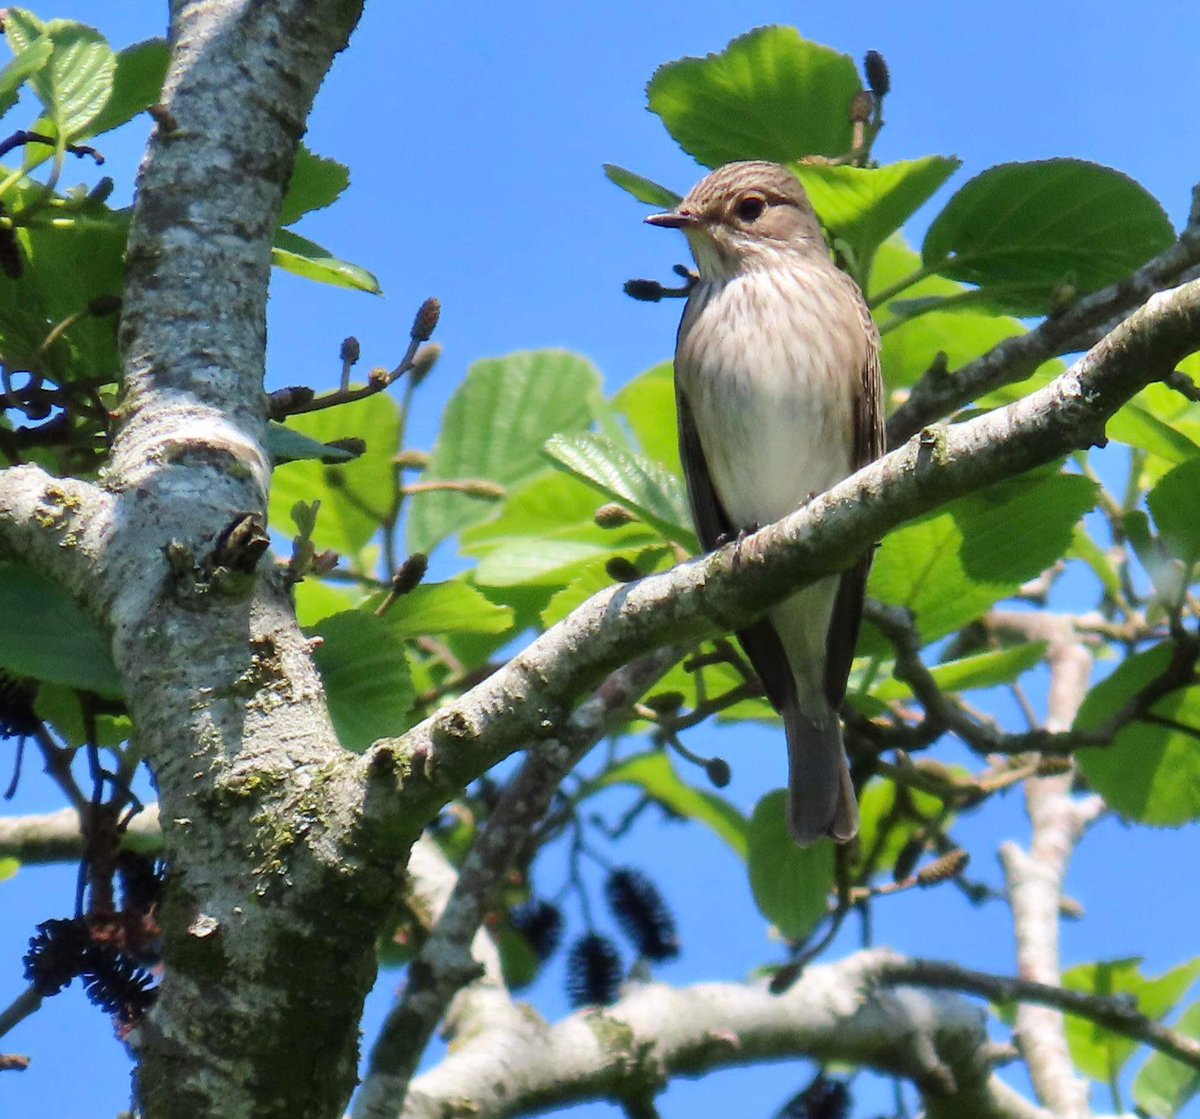 Spotted Flycatcher seen today between the feeding station and the power lines. @SurreyBirdNews